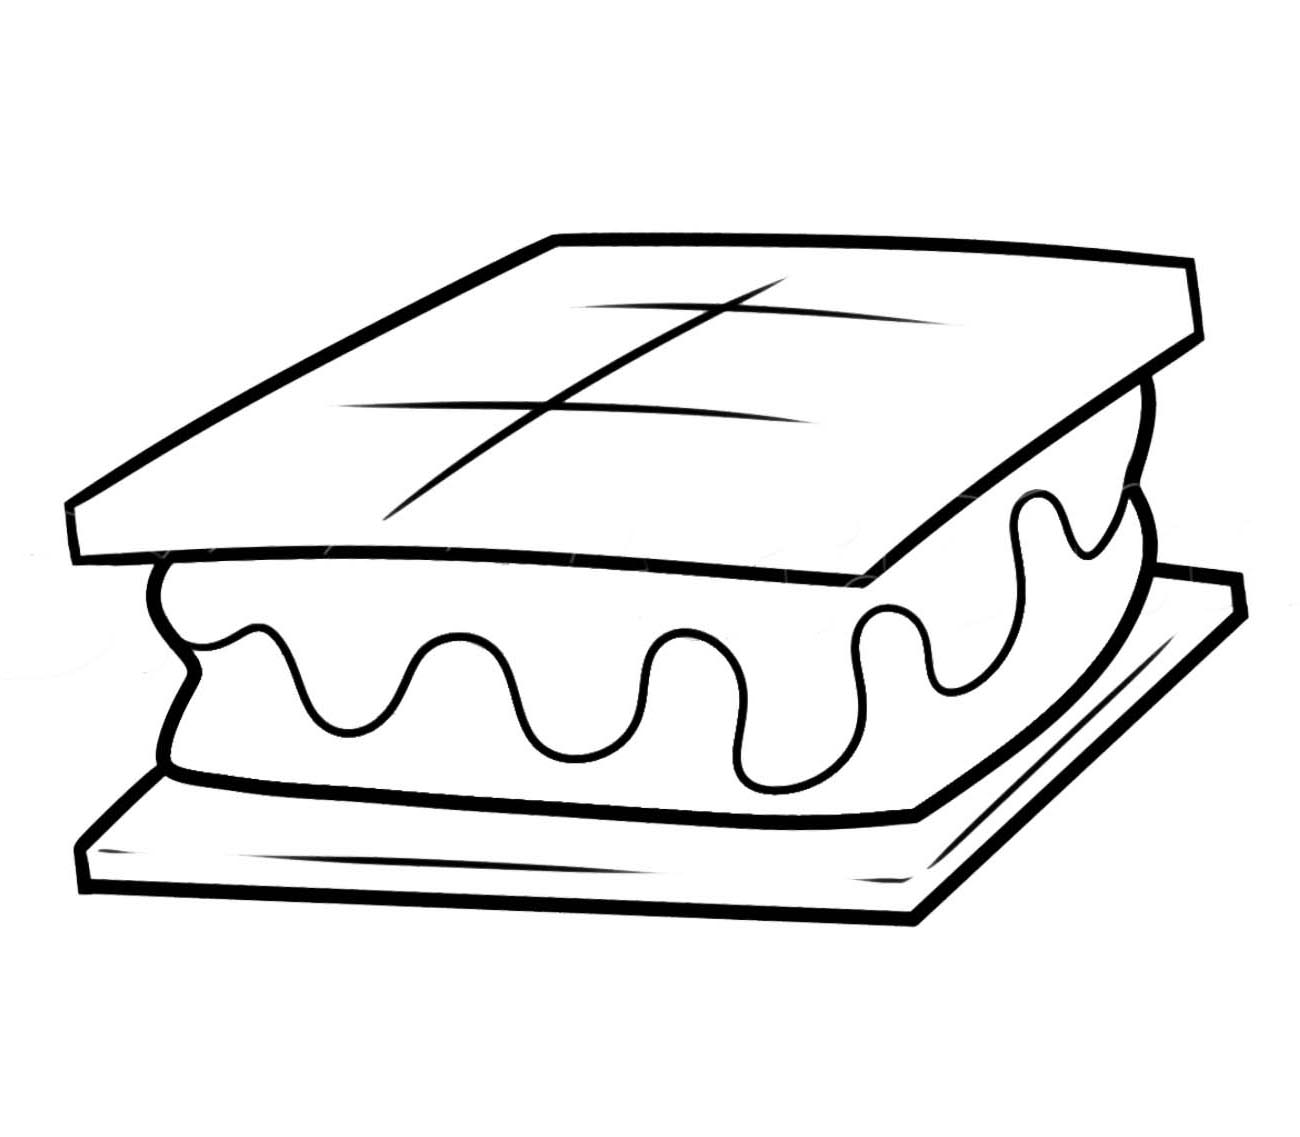 Smores Clip Art Black and White Coloring Pages